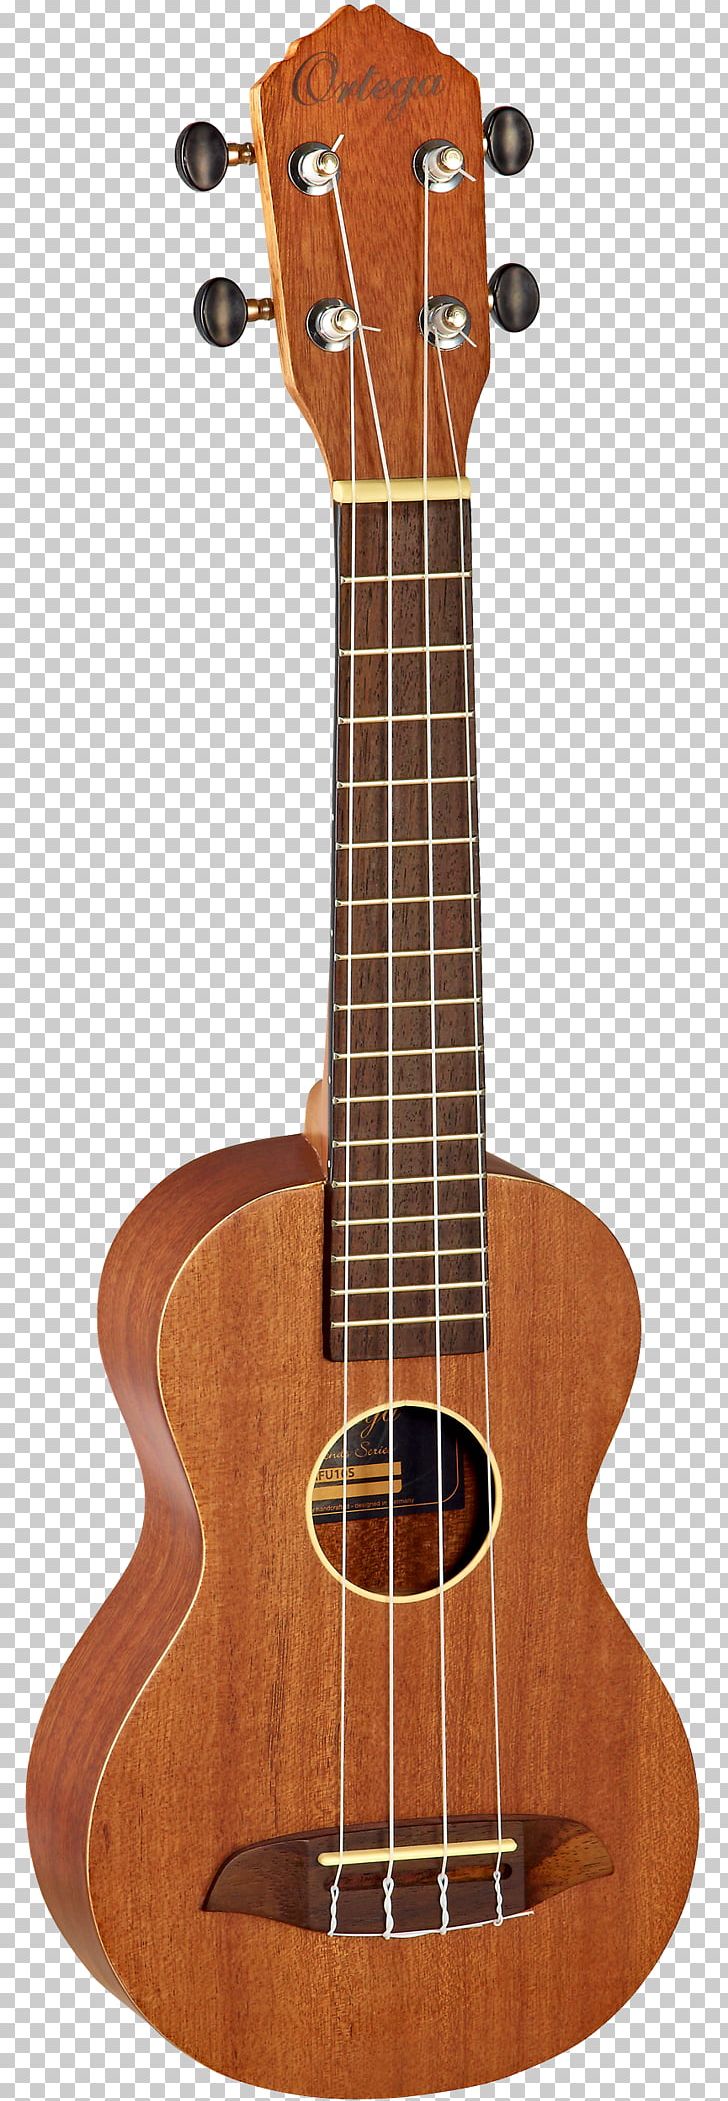 Ukulele String Instruments Music Guitar PNG, Clipart, Acoustic Guitar, Baritone, Cuatro, Double Bass, Guitar Accessory Free PNG Download